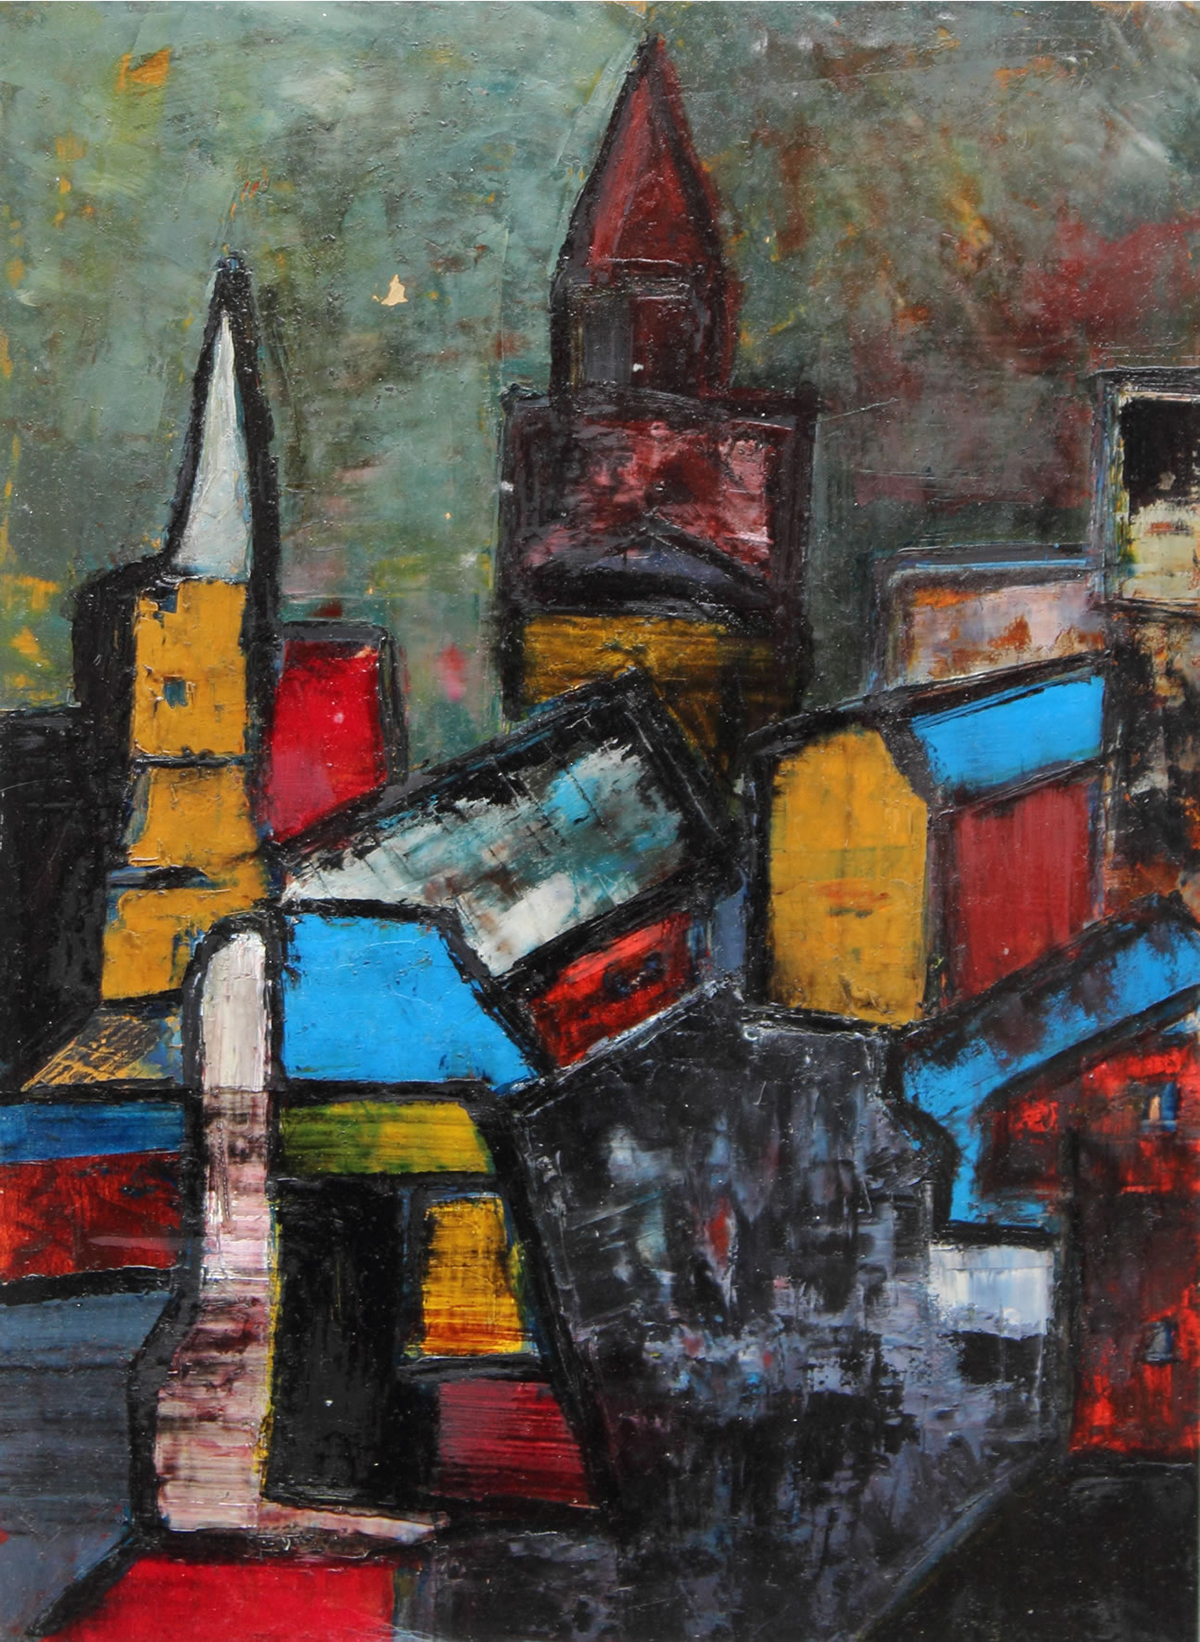 Image of Ribeiro's Untitled (Townscape), 1958.